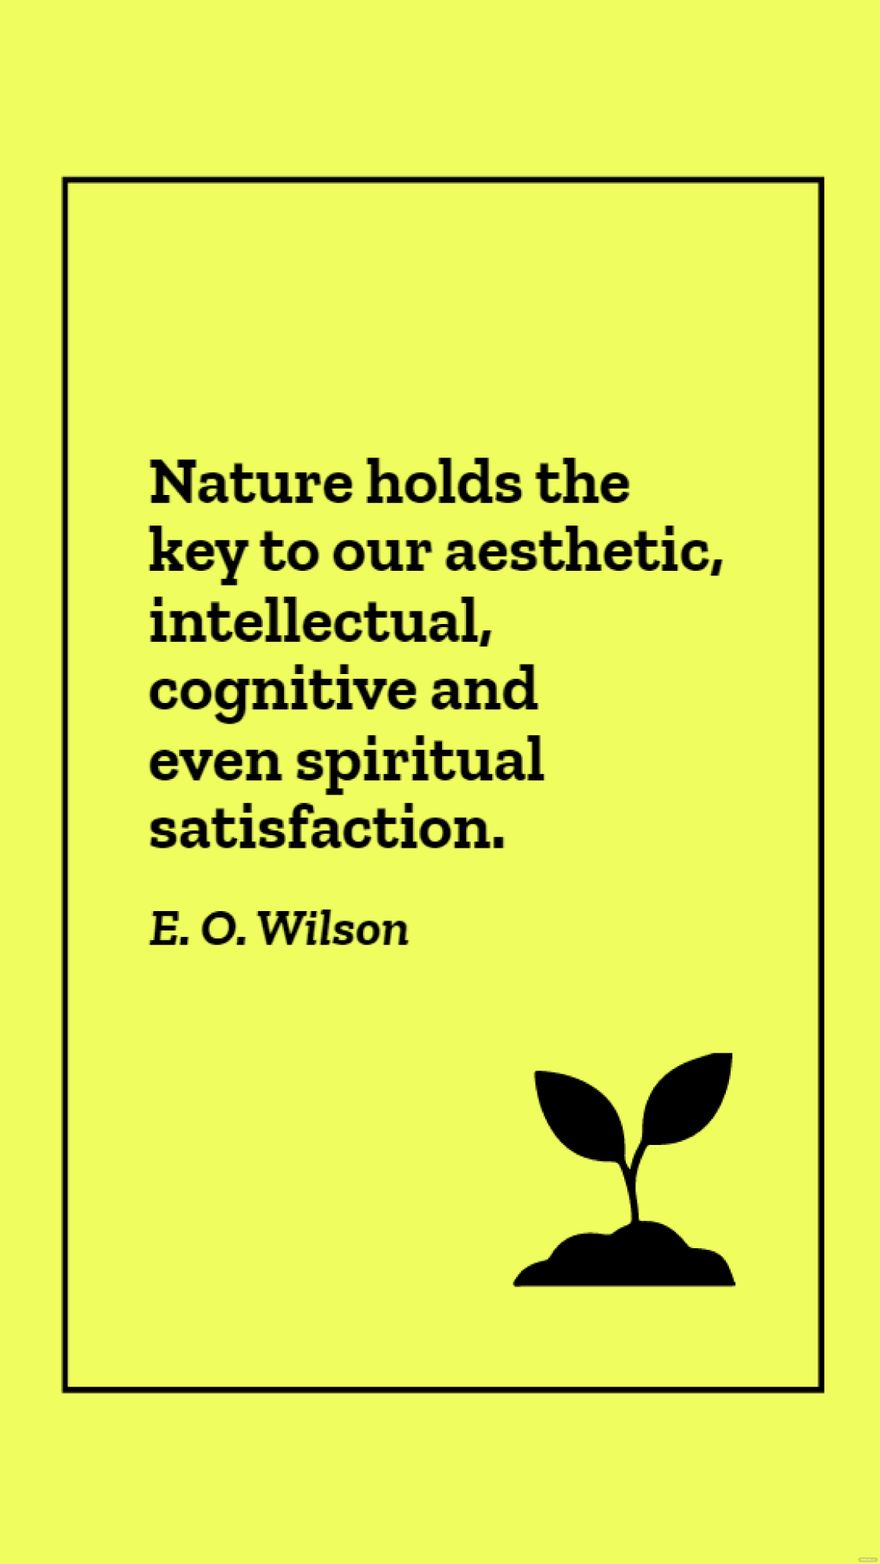 E. O. Wilson - Nature holds the key to our aesthetic, intellectual, cognitive and even spiritual satisfaction. in JPG